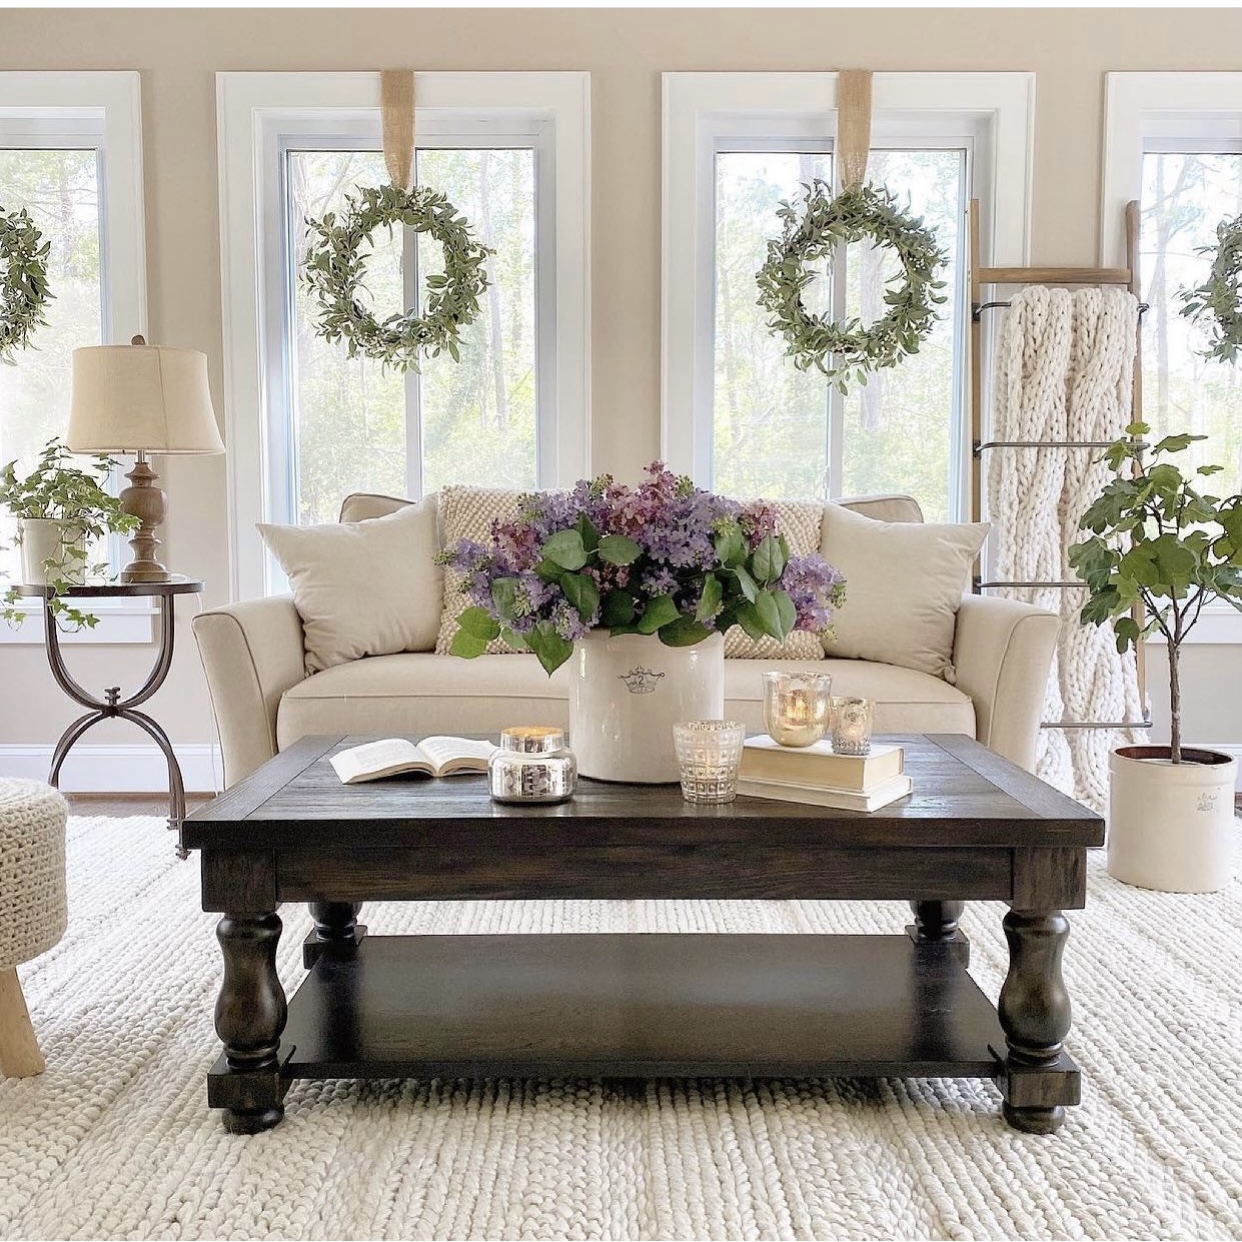 Farmhouse sunroom with a beige sofa and a coffee table in front of it with hydrangeas in a crock and candles on it. Behind the couch is a blanket ladder with a cozy blanket draped over it. 